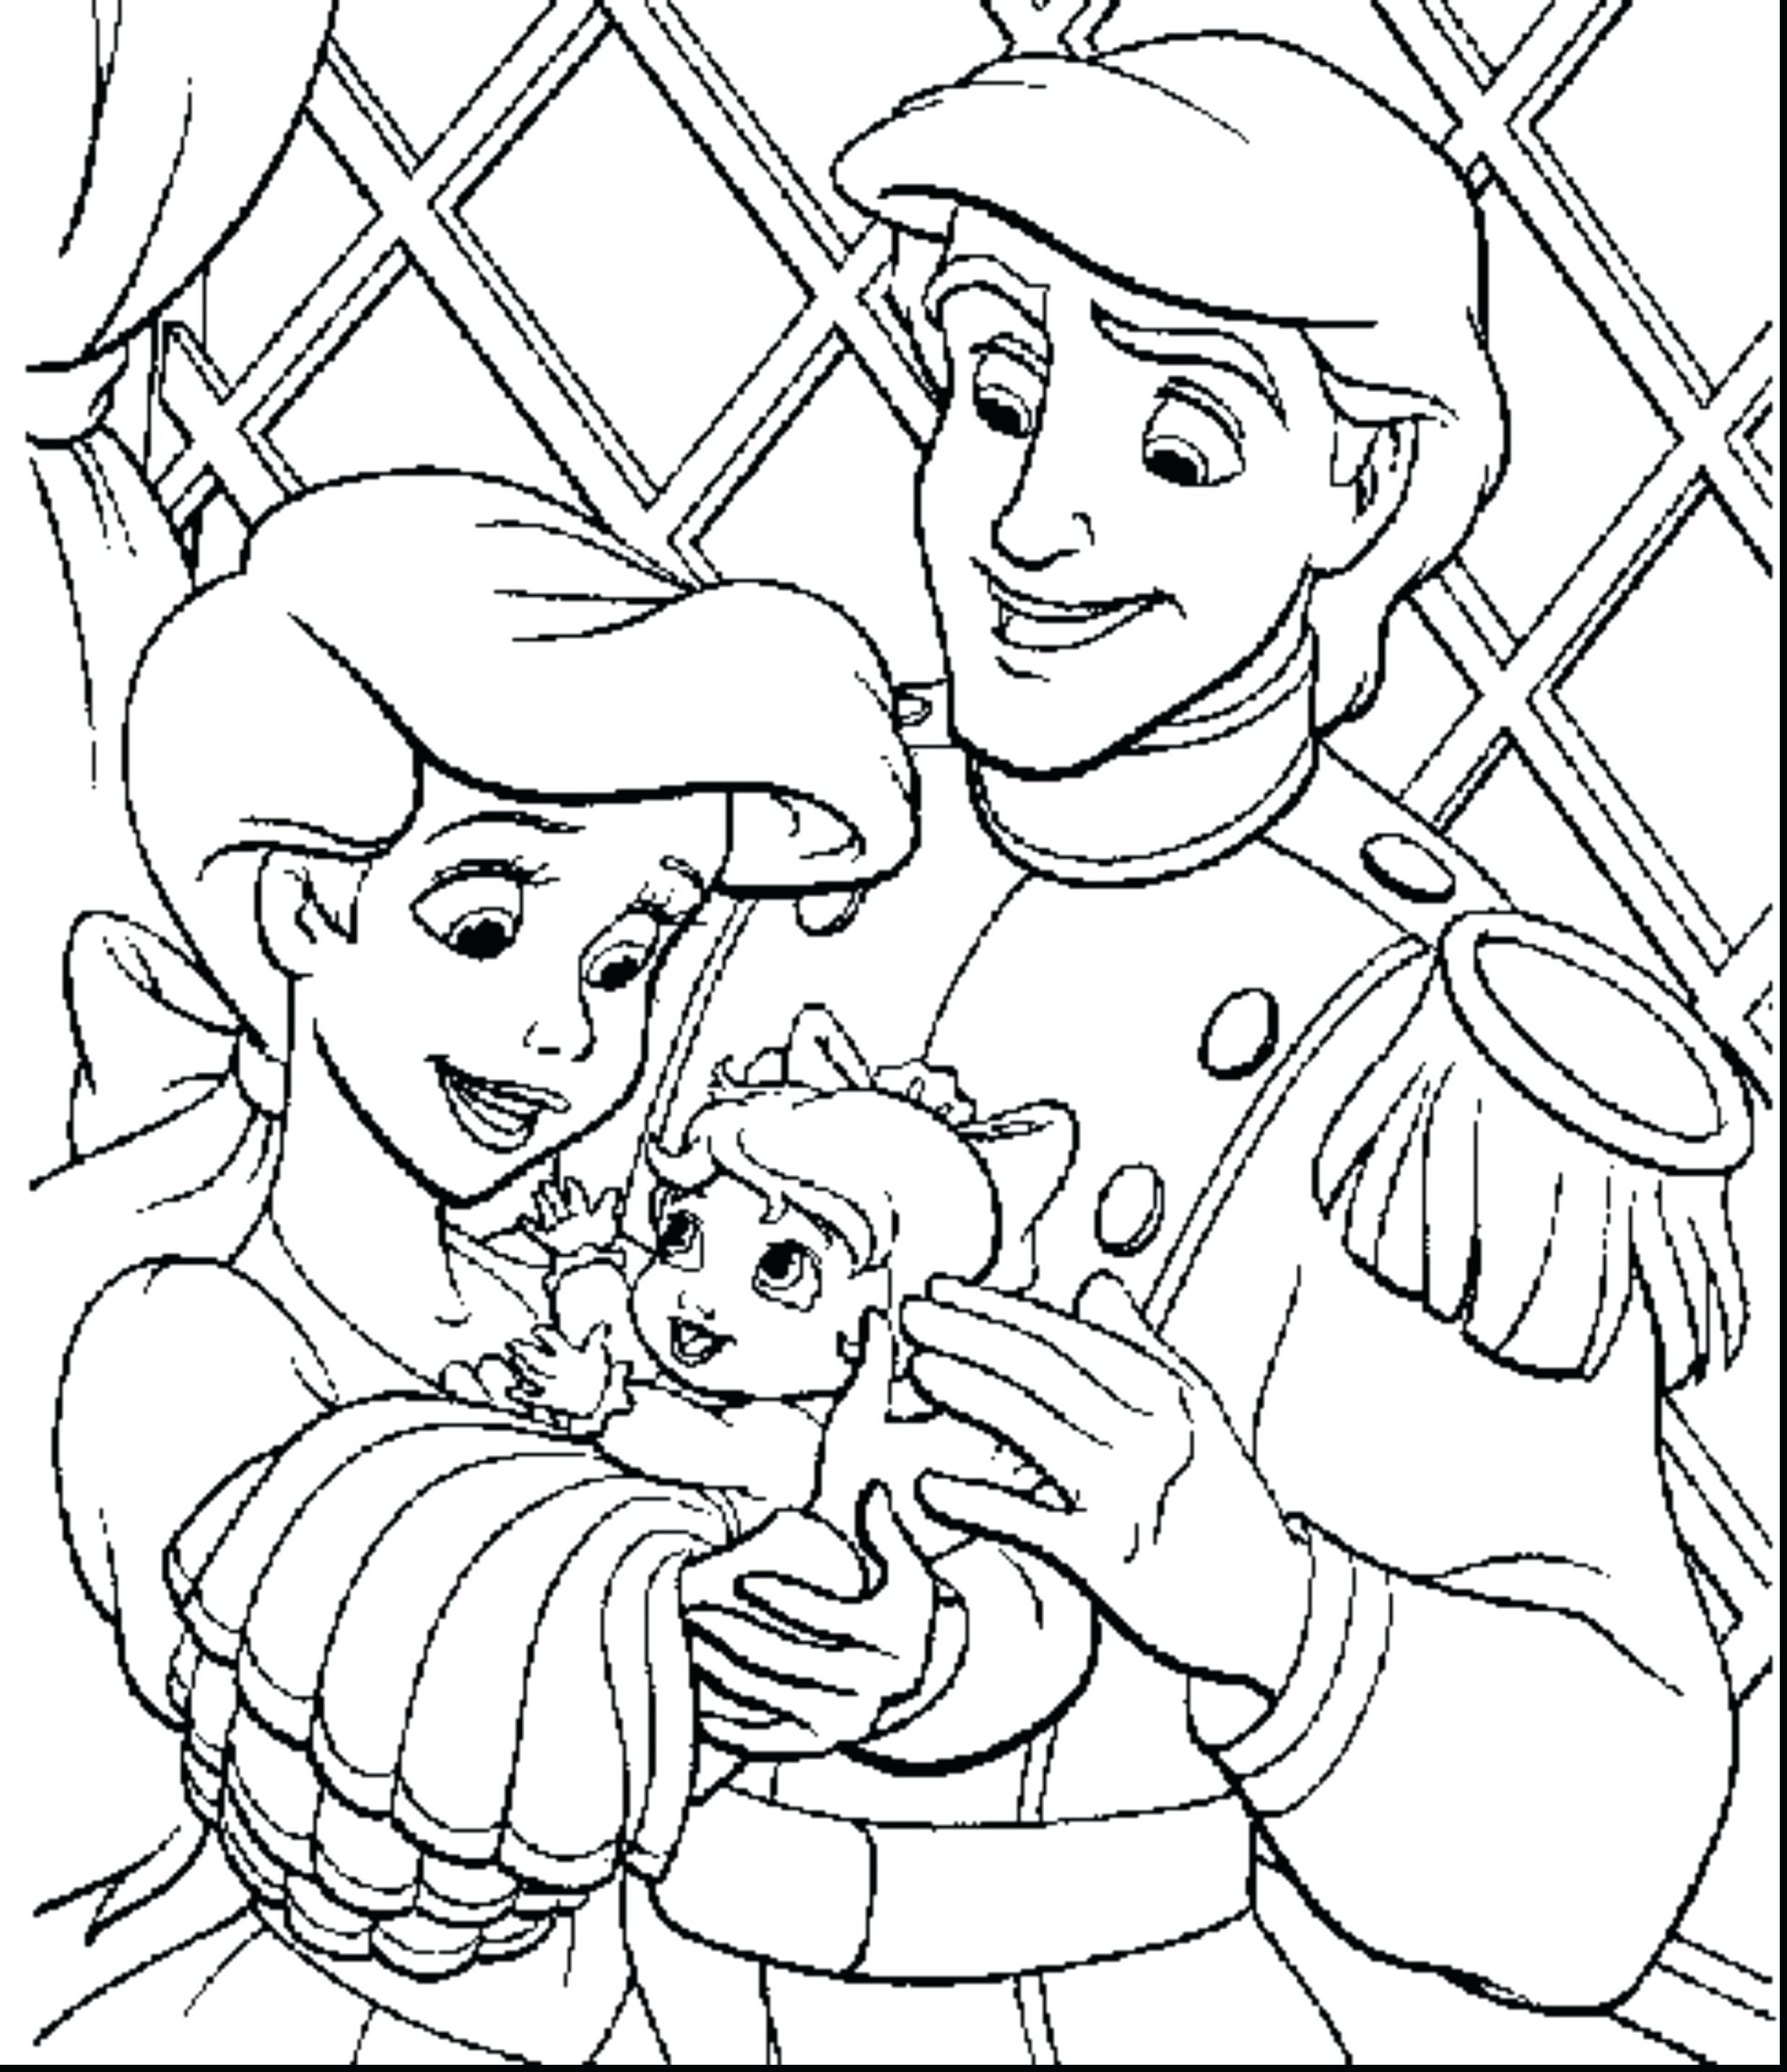 Baby Belle Coloring Pages at GetColorings.com | Free ...